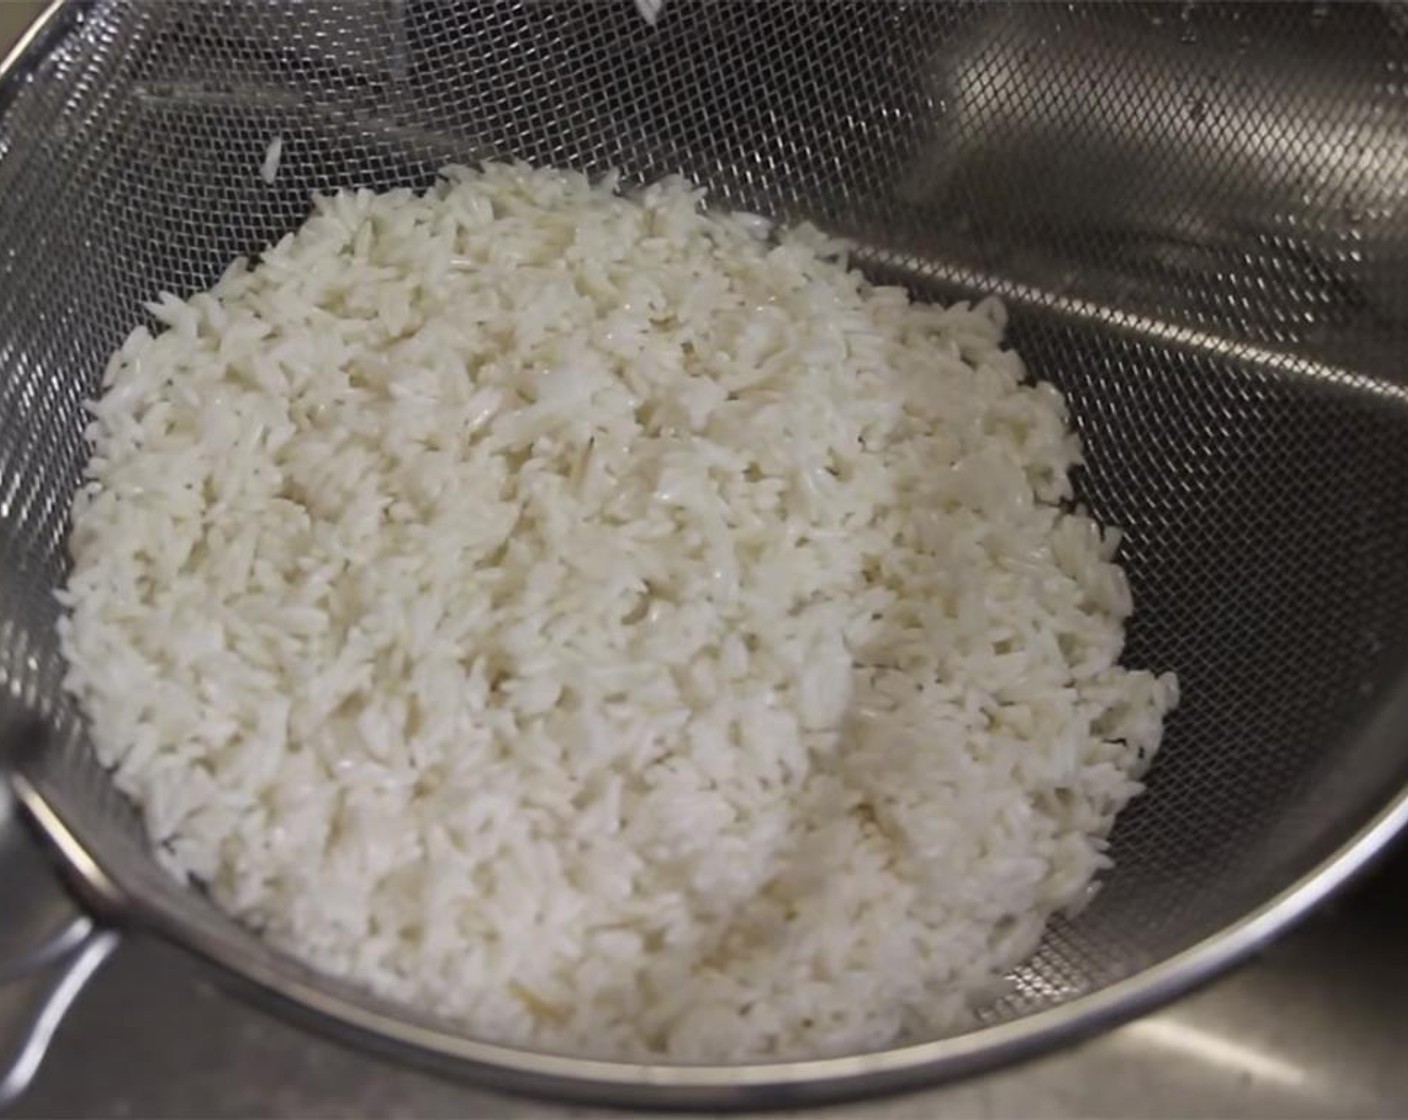 step 2 Wash and rinse the Long Grain White Rice (2 cups) a couple of times to remove impurities. Rinse it under running water through a strainer, using your fingers to let the water run through the uncooked rice.